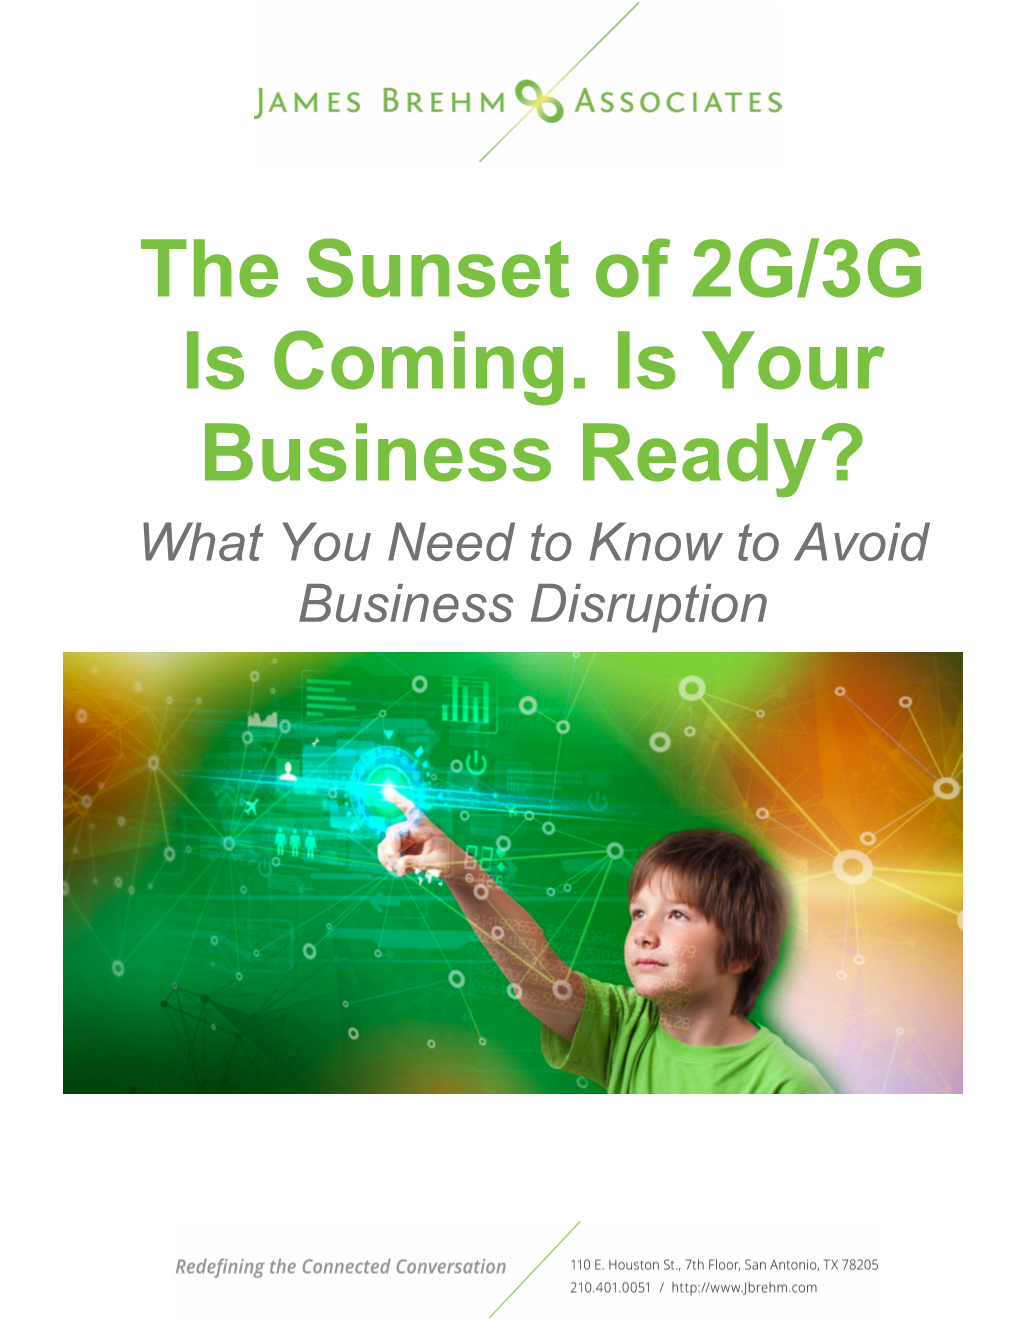 The Sunset of 2G/3G Is Coming. Is Your Business Ready? What You Need to Know to Avoid Business Disruption